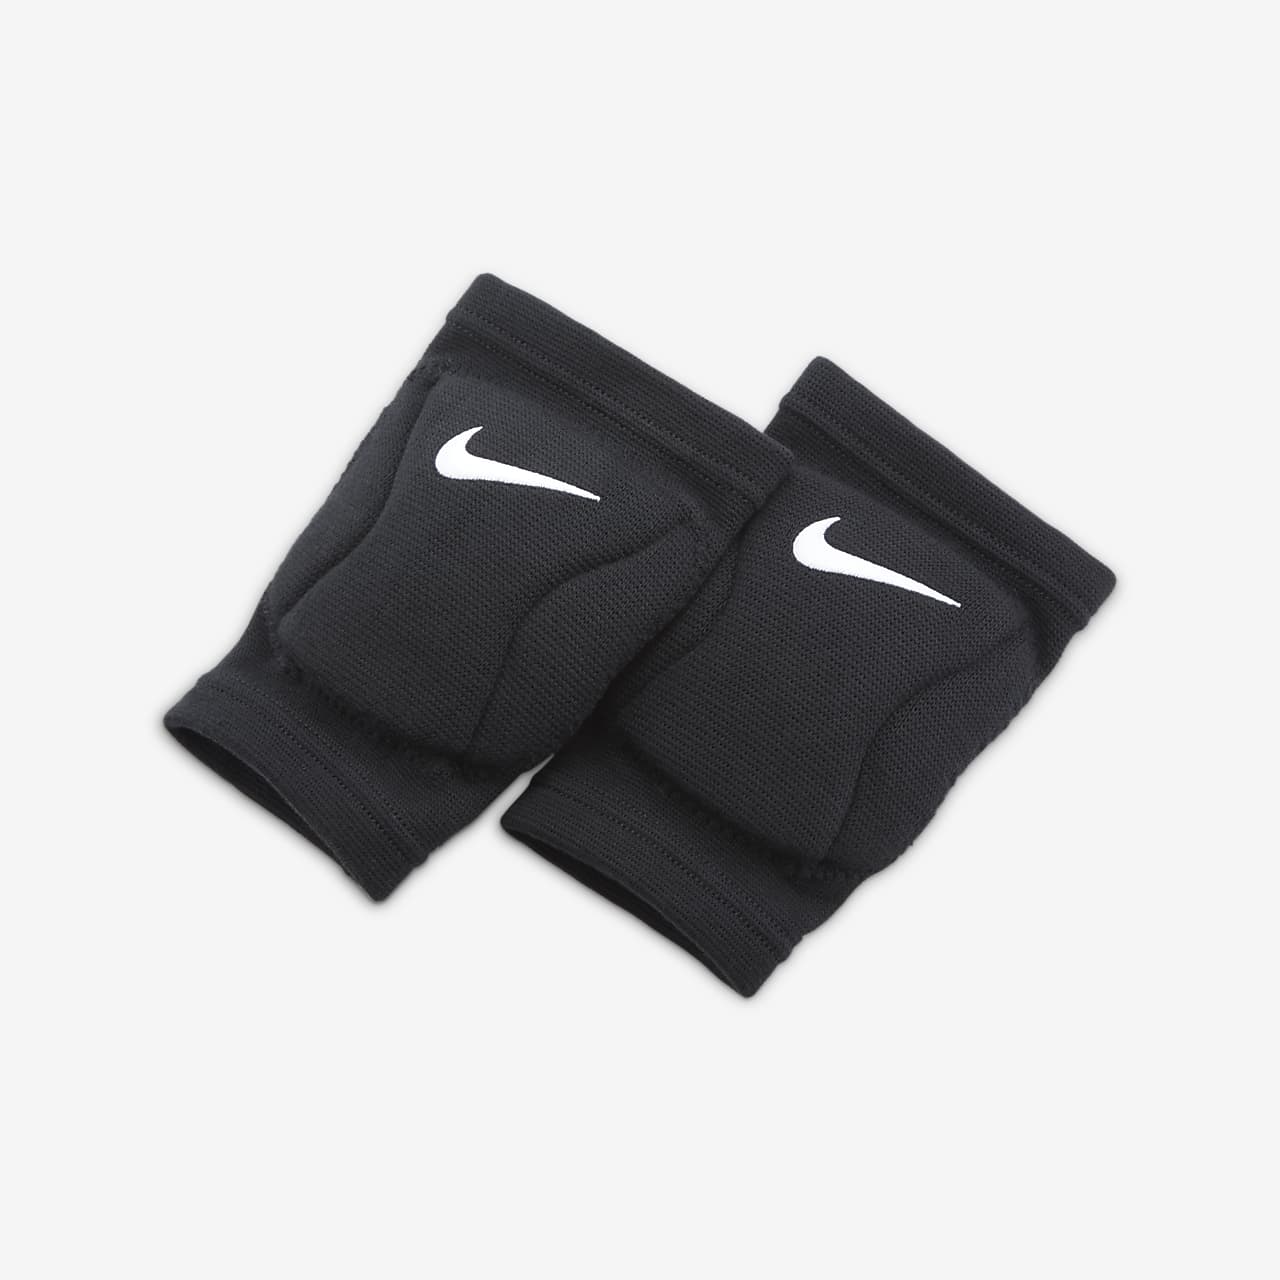 volleyball nike knee pads